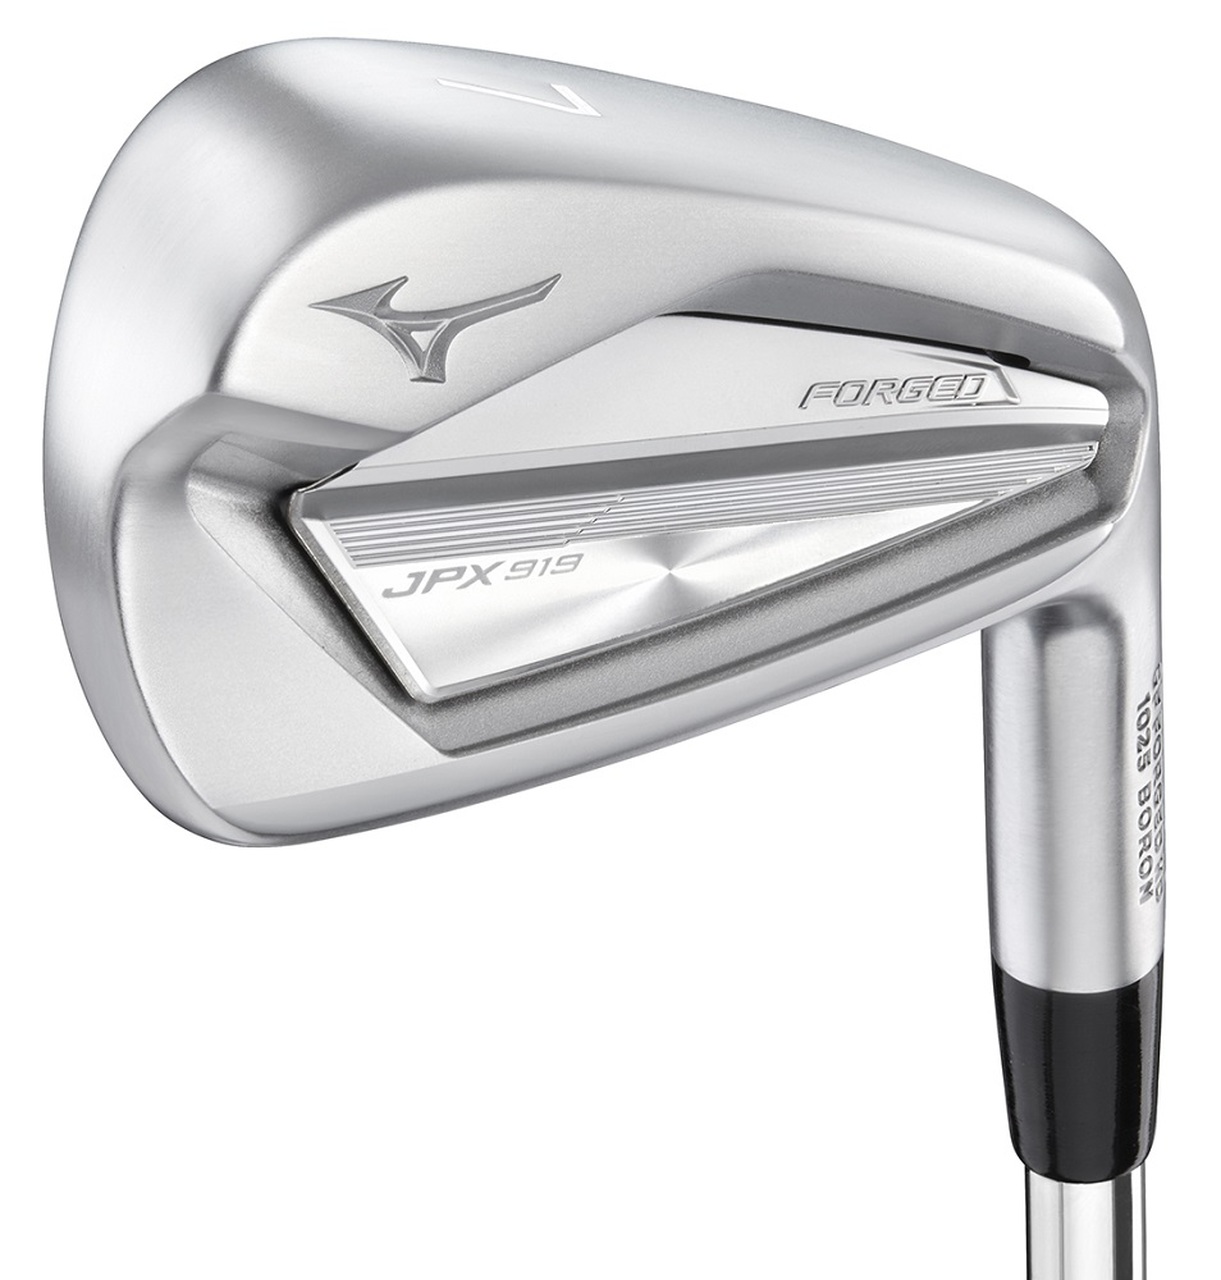 Forged JPX 919 Irons